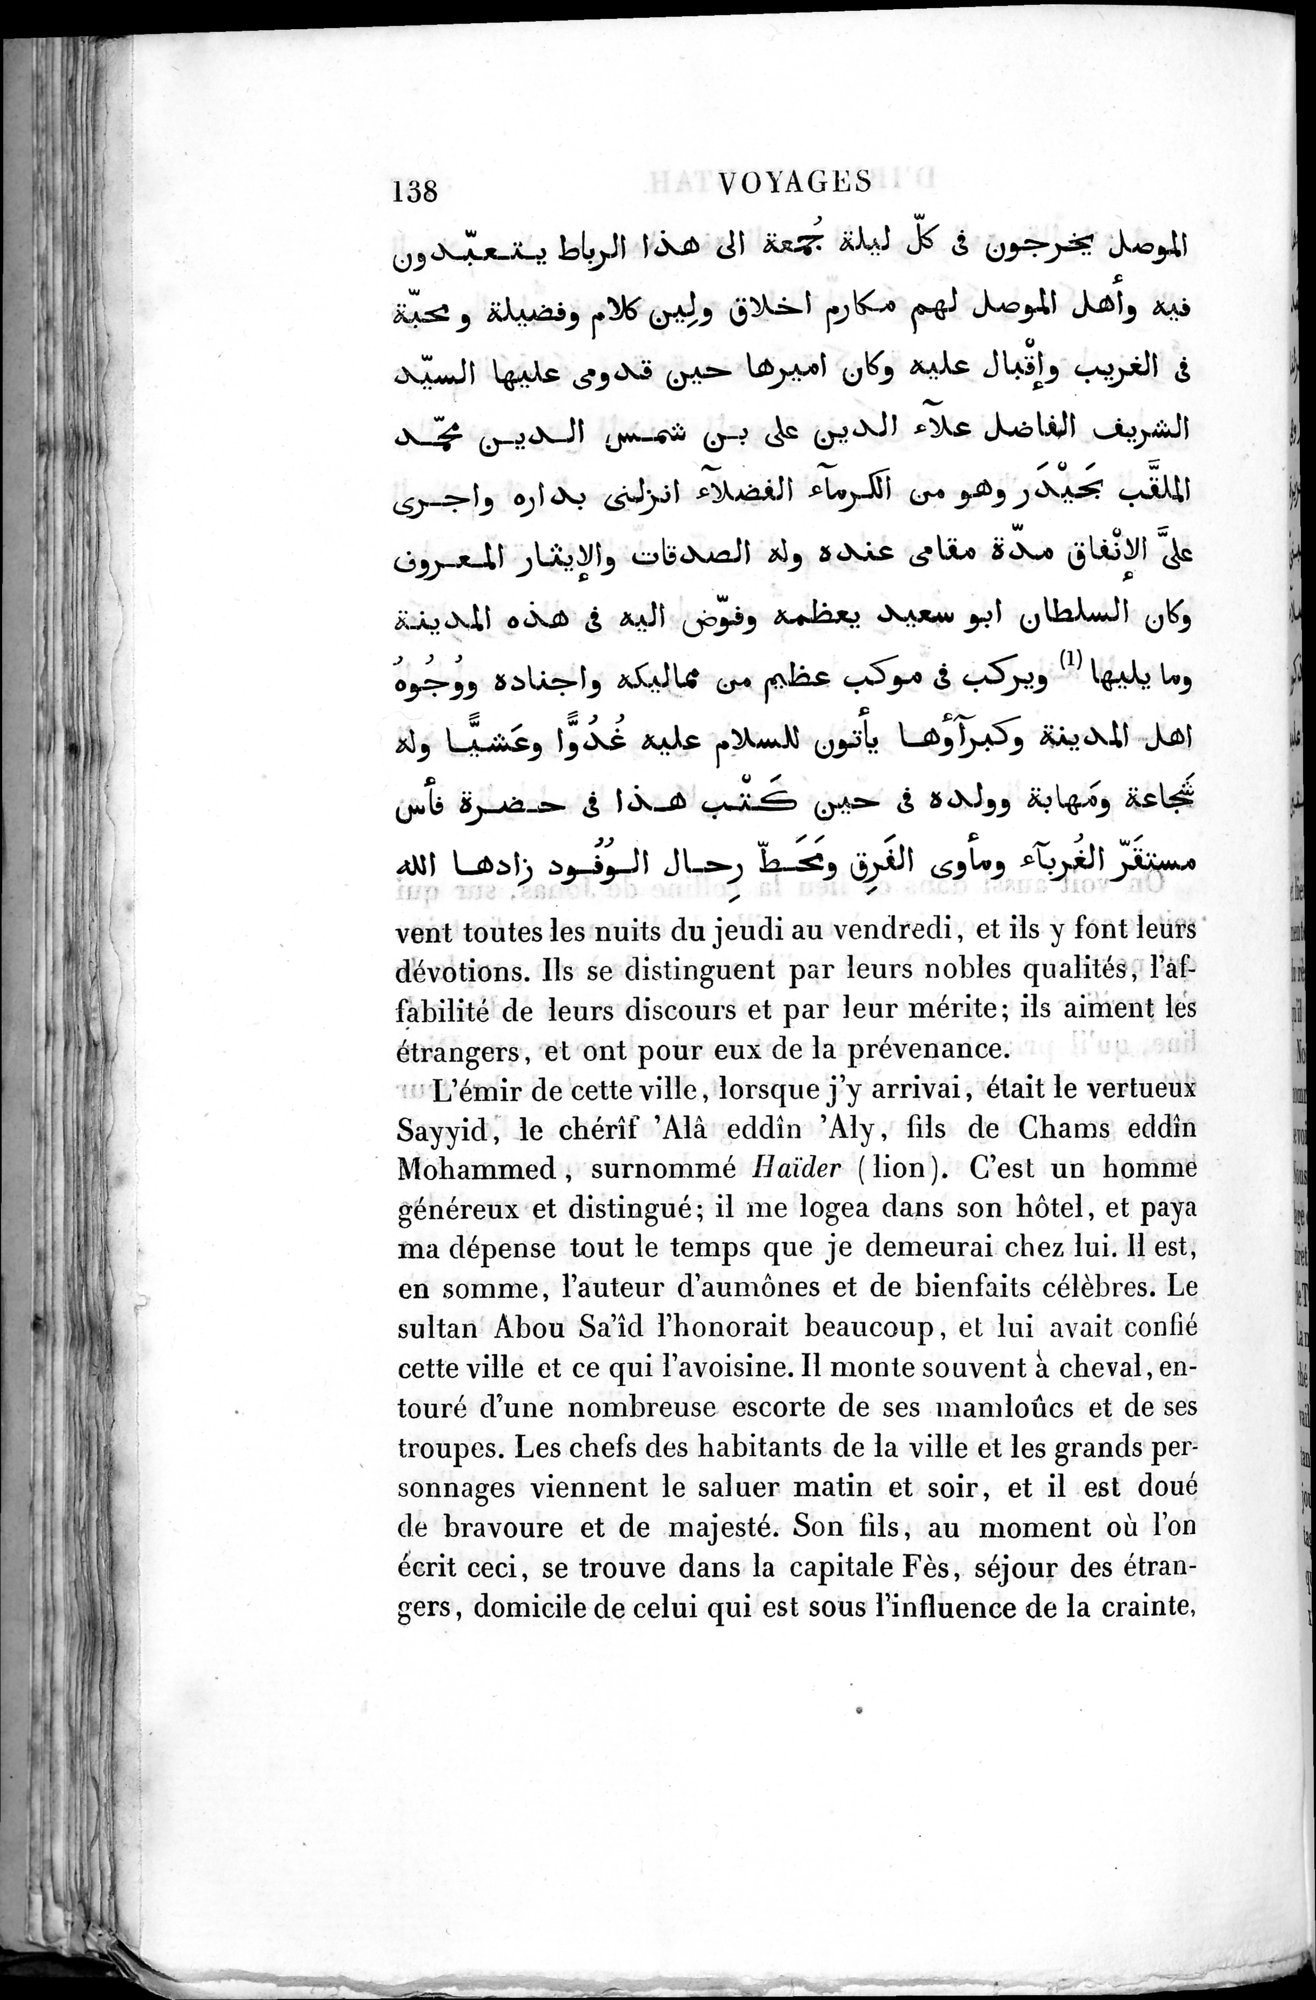 Voyages d'Ibn Batoutah : vol.2 / Page 166 (Grayscale High Resolution Image)